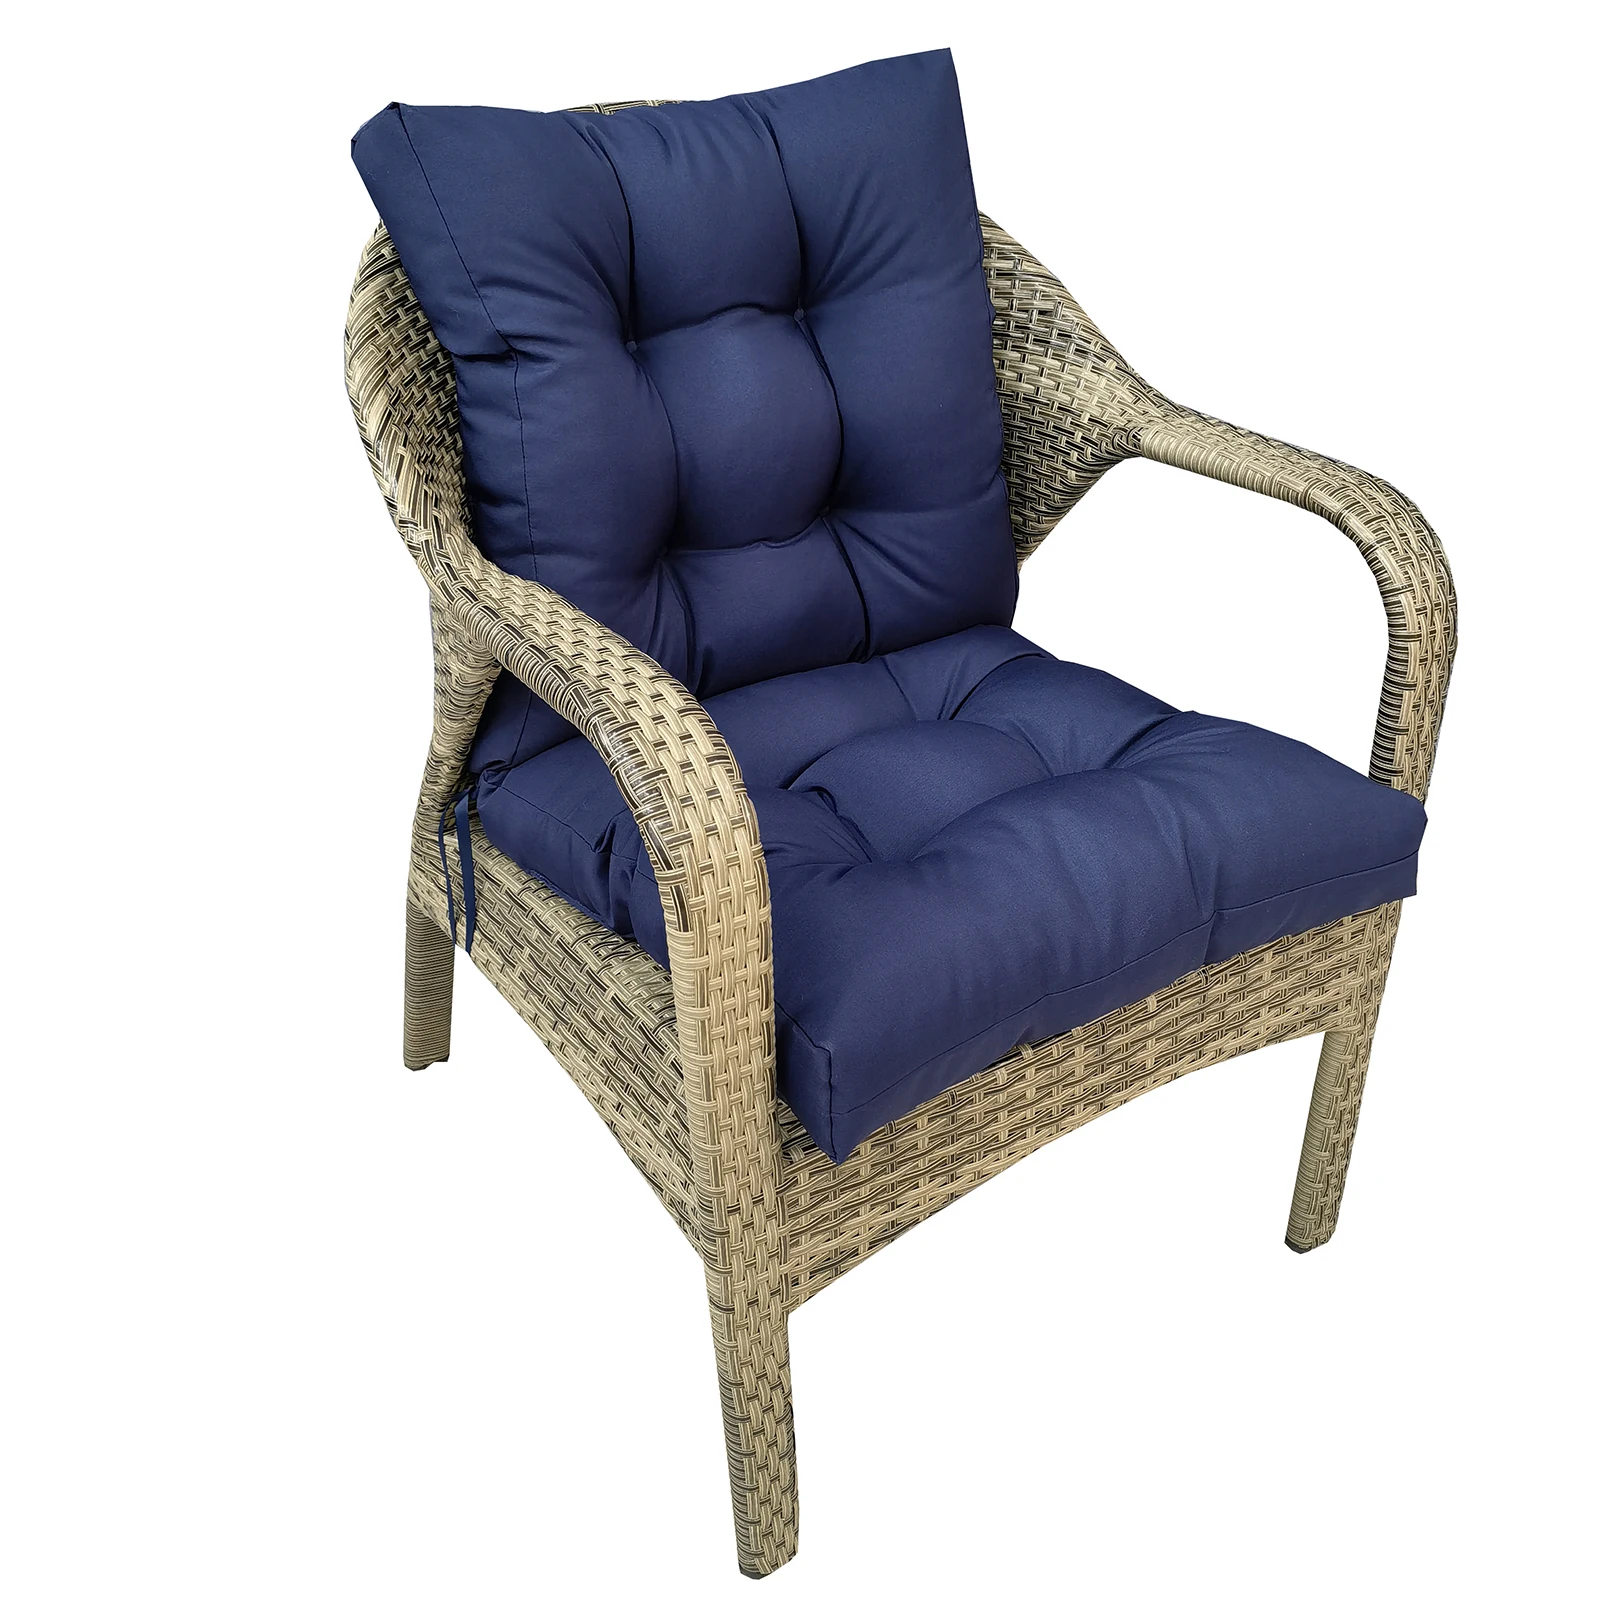 https://ae01.alicdn.com/kf/Se4024bdb197d4ebdb7264c7dbb0d5351V/1PCS-Outdoor-Low-Back-Wicker-Chair-Cushion-Thicken-Durable-Garden-Terrace-Dining-Chair-Cushion-Seat-Replacement.jpg